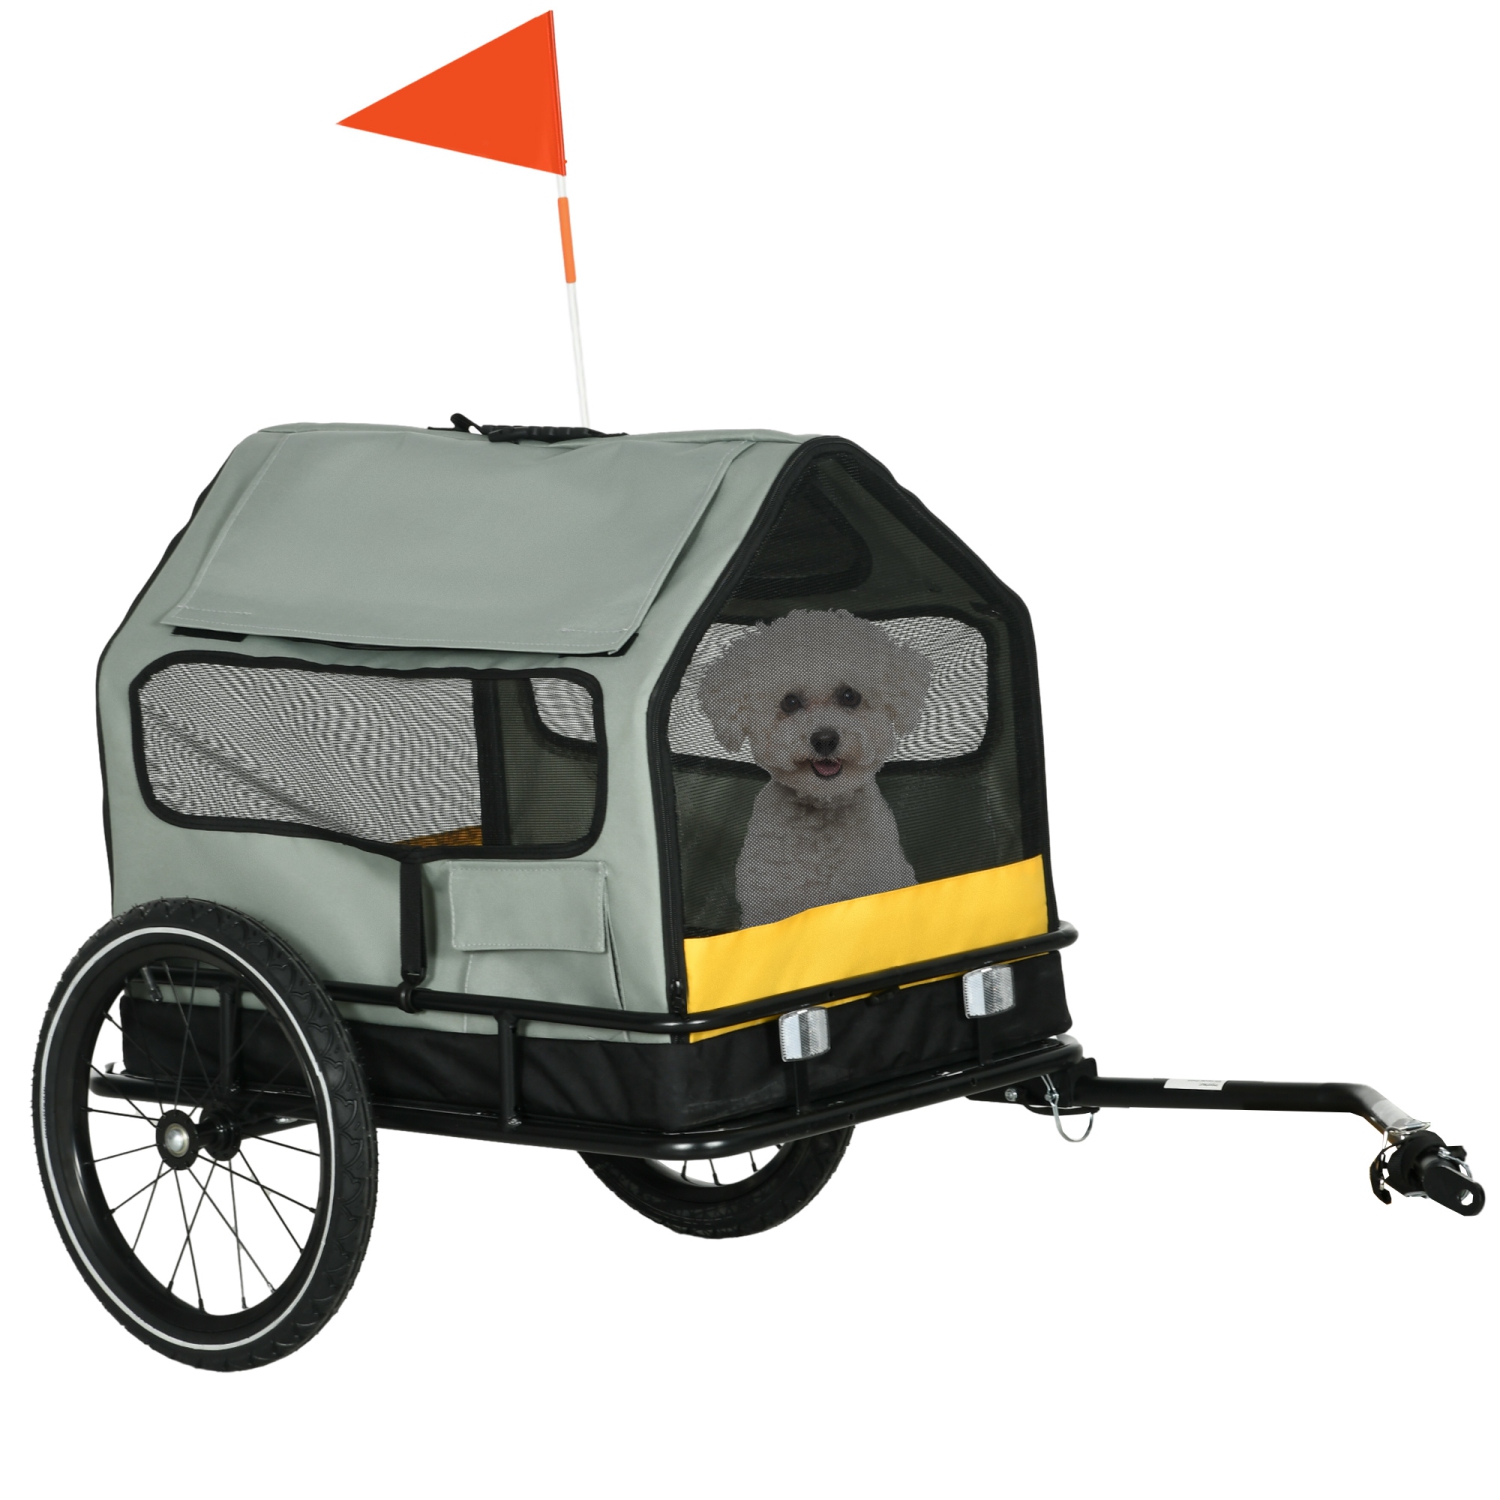 Aosom 3 in 1 Dog Bike Trailer, Pet Cargo, Pet House with Safety Leash, Hitch, Quick-Release Wheels, Flag, Reflectors, Cushion, Dog Wagon for Small Dogs, Grey